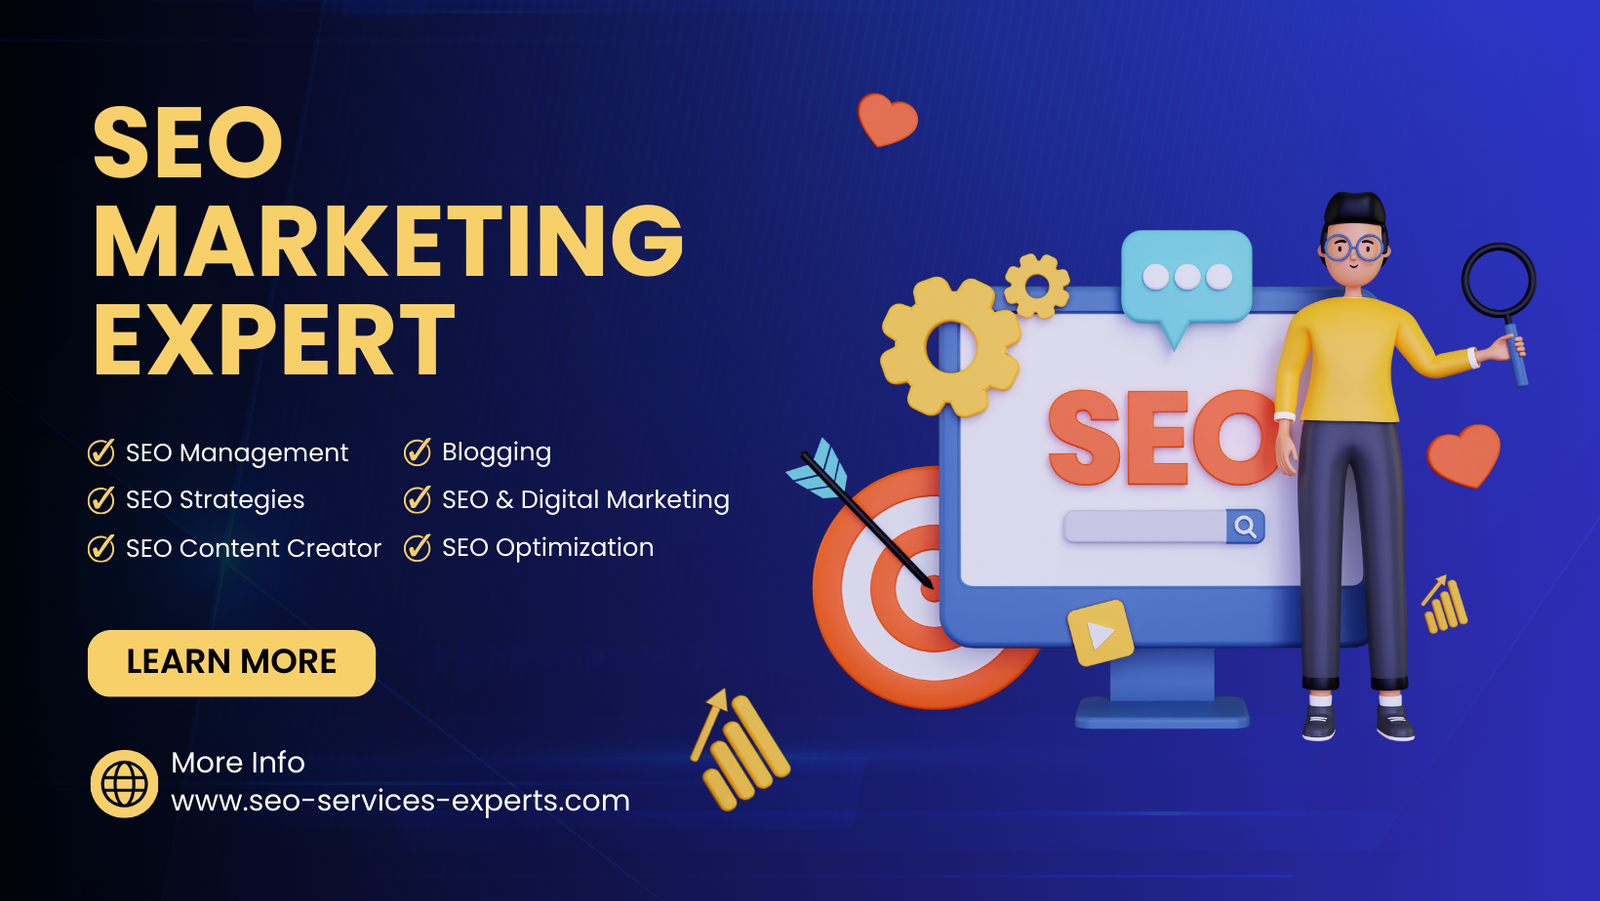 SEO Dubai : Best SEO Company Dubai : Expert SEO Services : We have a team of SEO experts in Dubai focused on supercharging your online growth with measurable results.